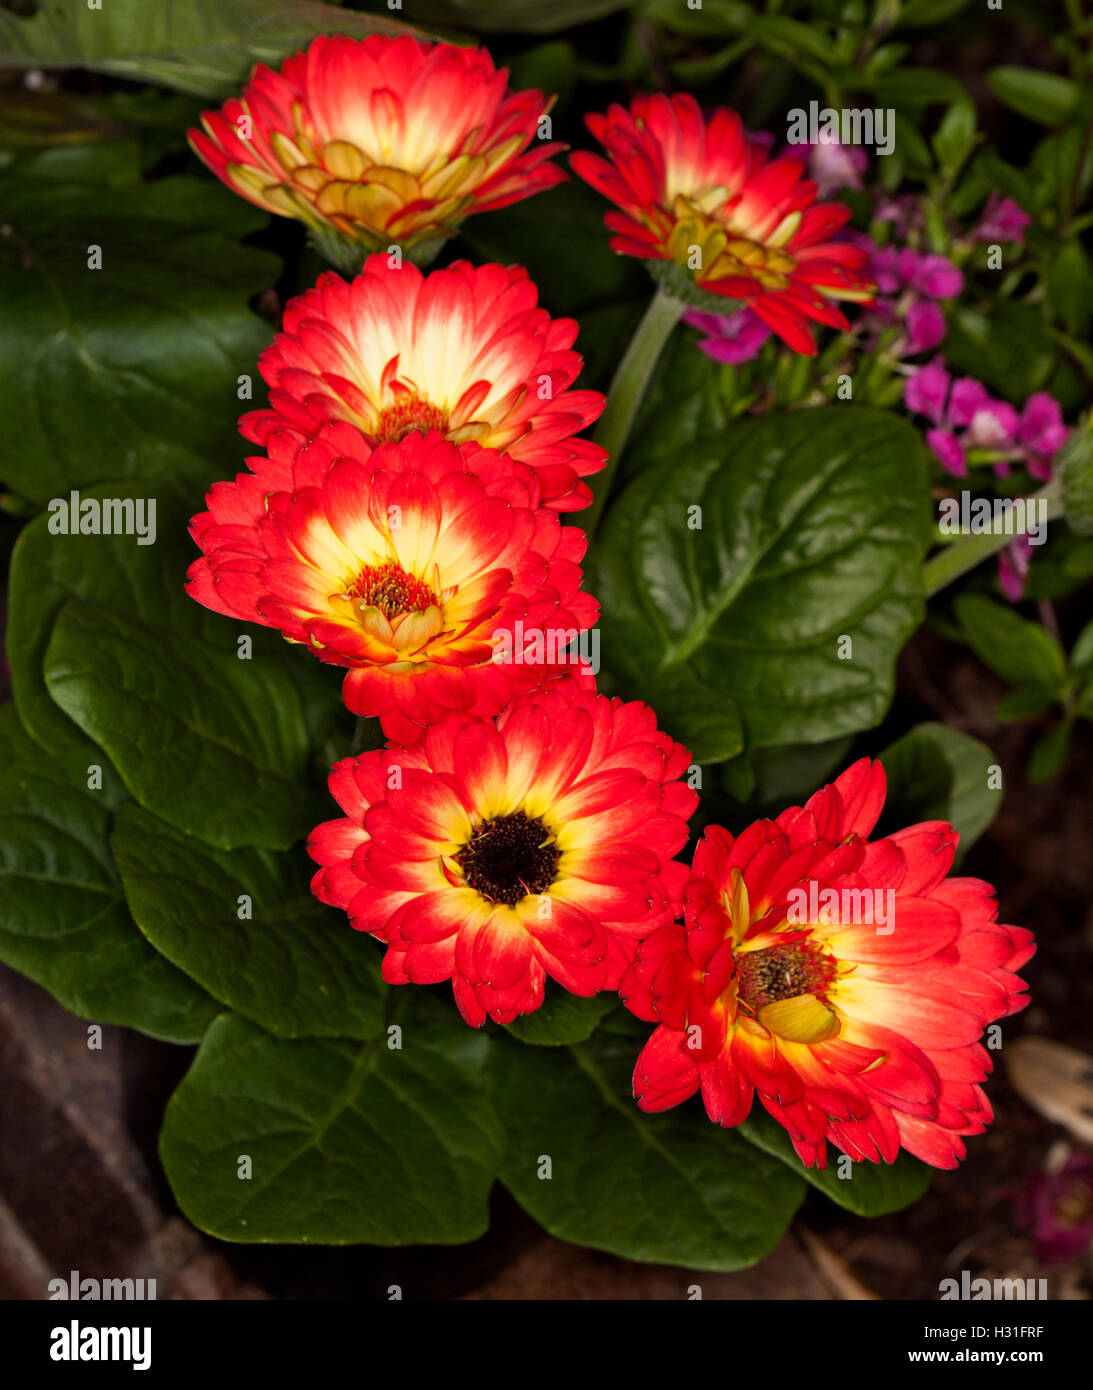 Cluster of spectacular vivid red flowers with contrasting yellow centres and dark green leaves of Gerbera jamesonii, a perennial Stock Photo